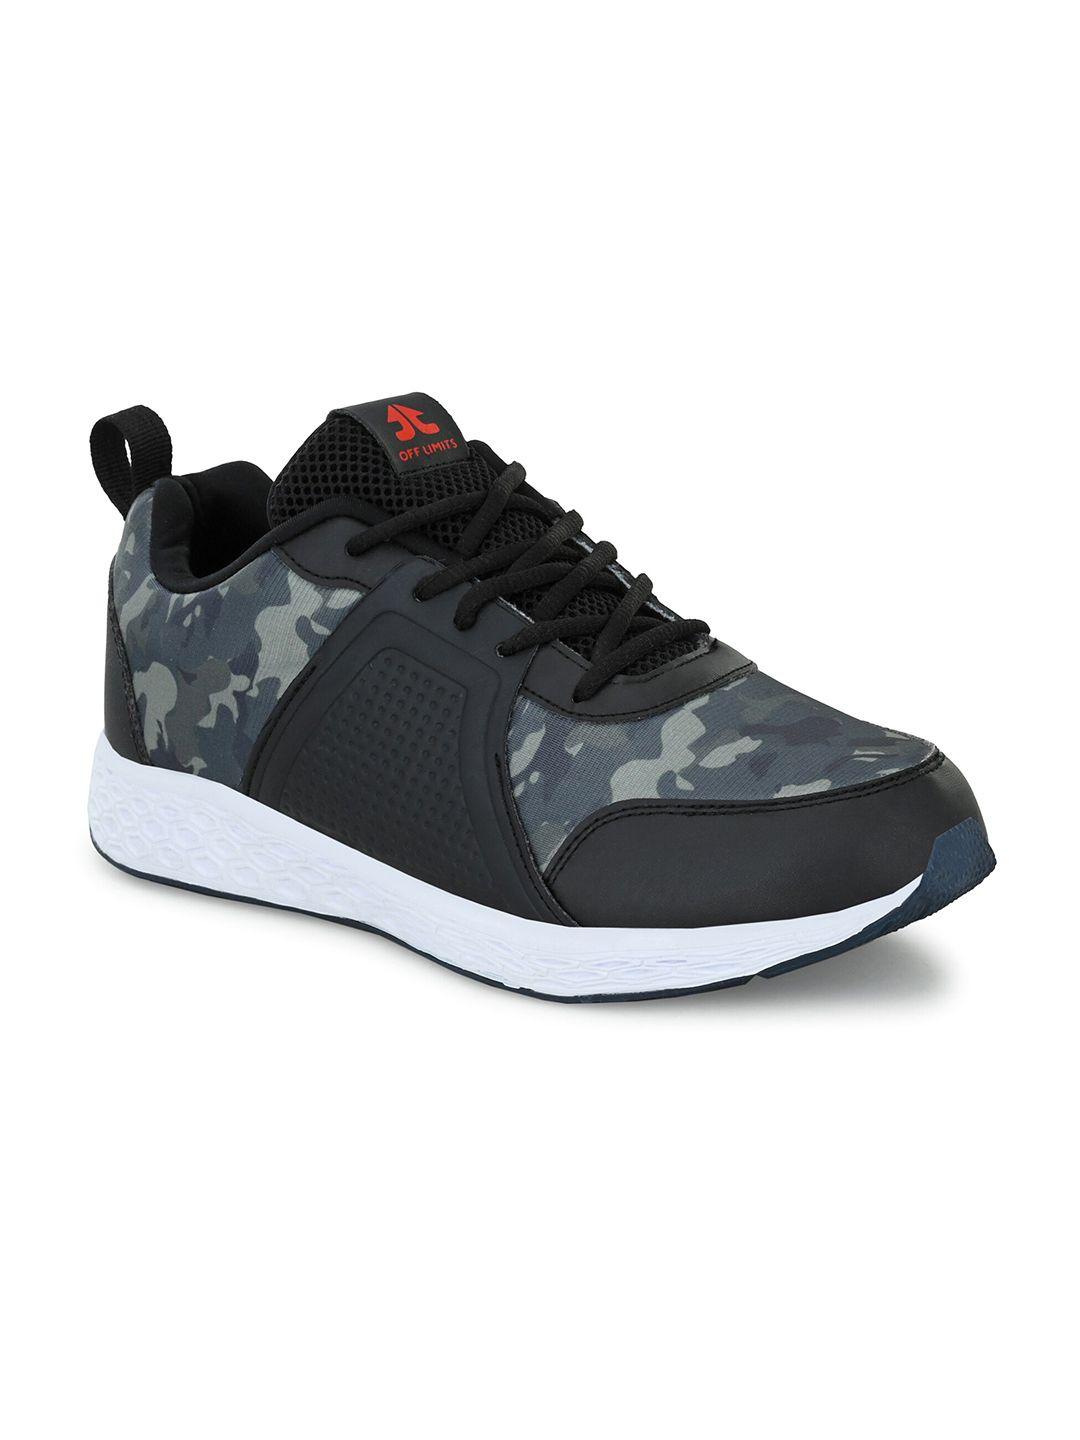 OFF LIMITS Men Olive Green Mesh Running Non-Marking Shoes